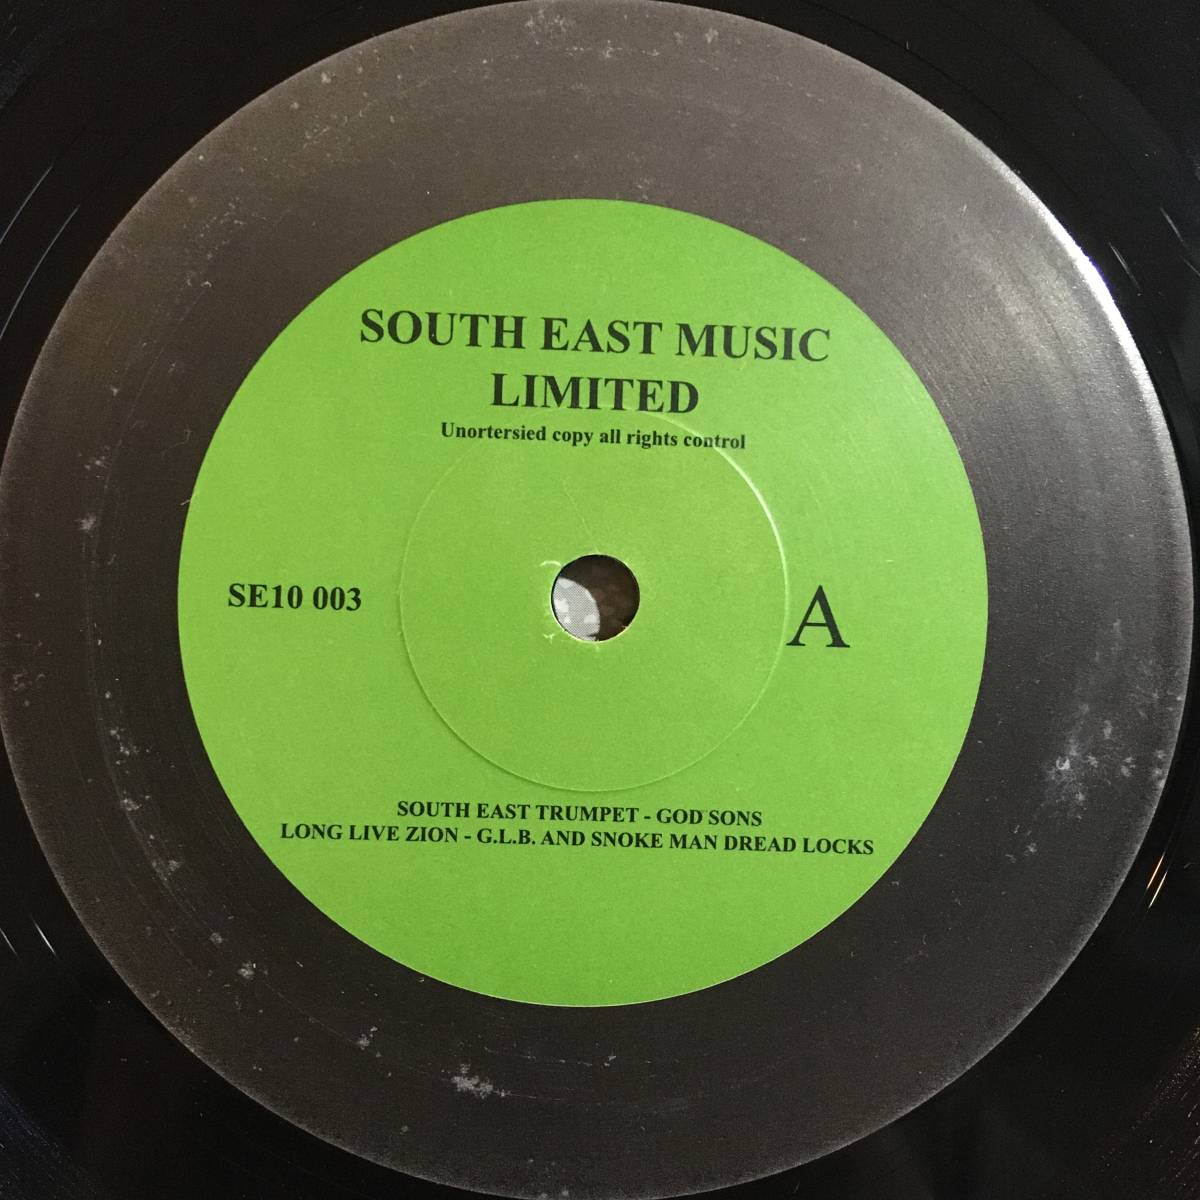 God Sons - Sylford Walker / South East Trumpet - Eternal Day　[South East Music Limited - SE10 003]_画像1